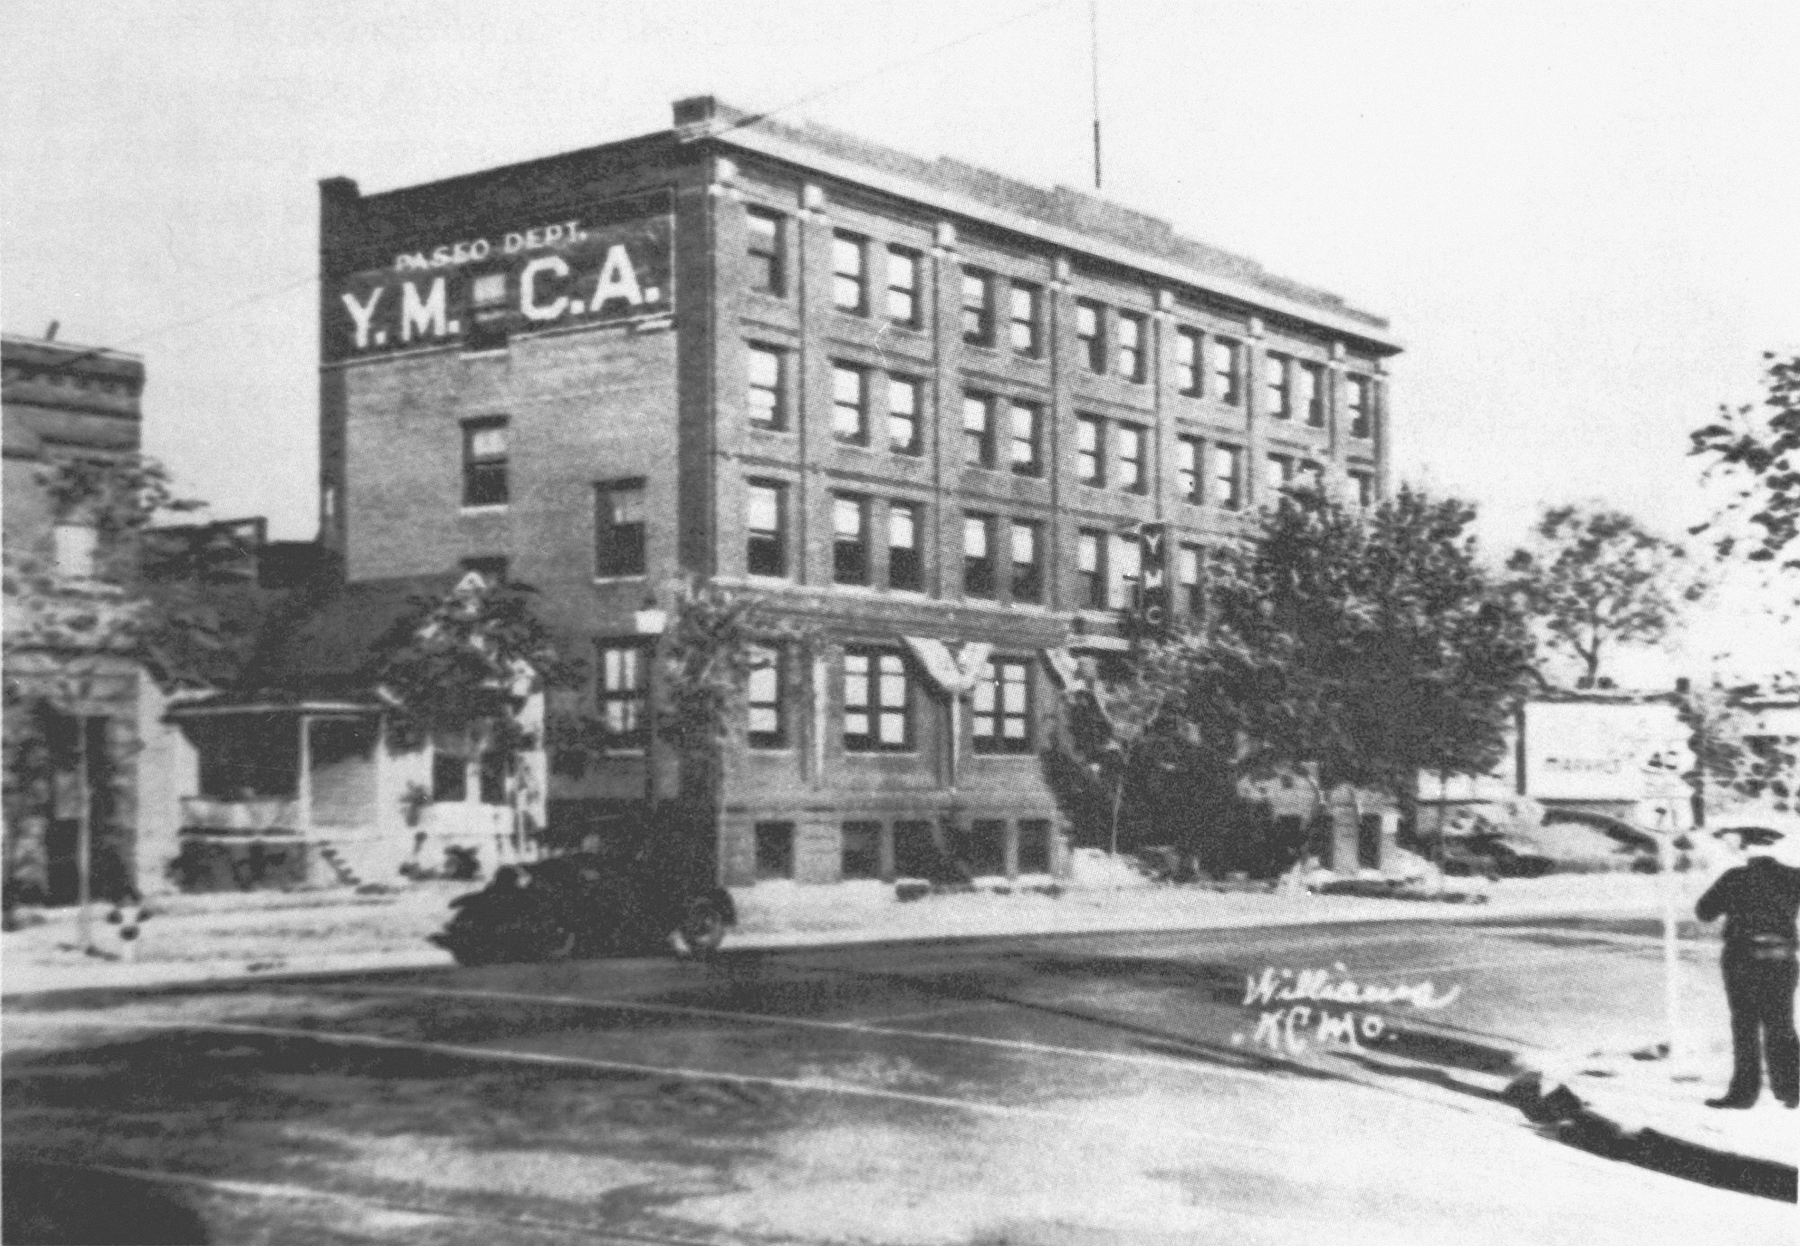 YMCA building in 1920 where Rube Foster established the Negro National League